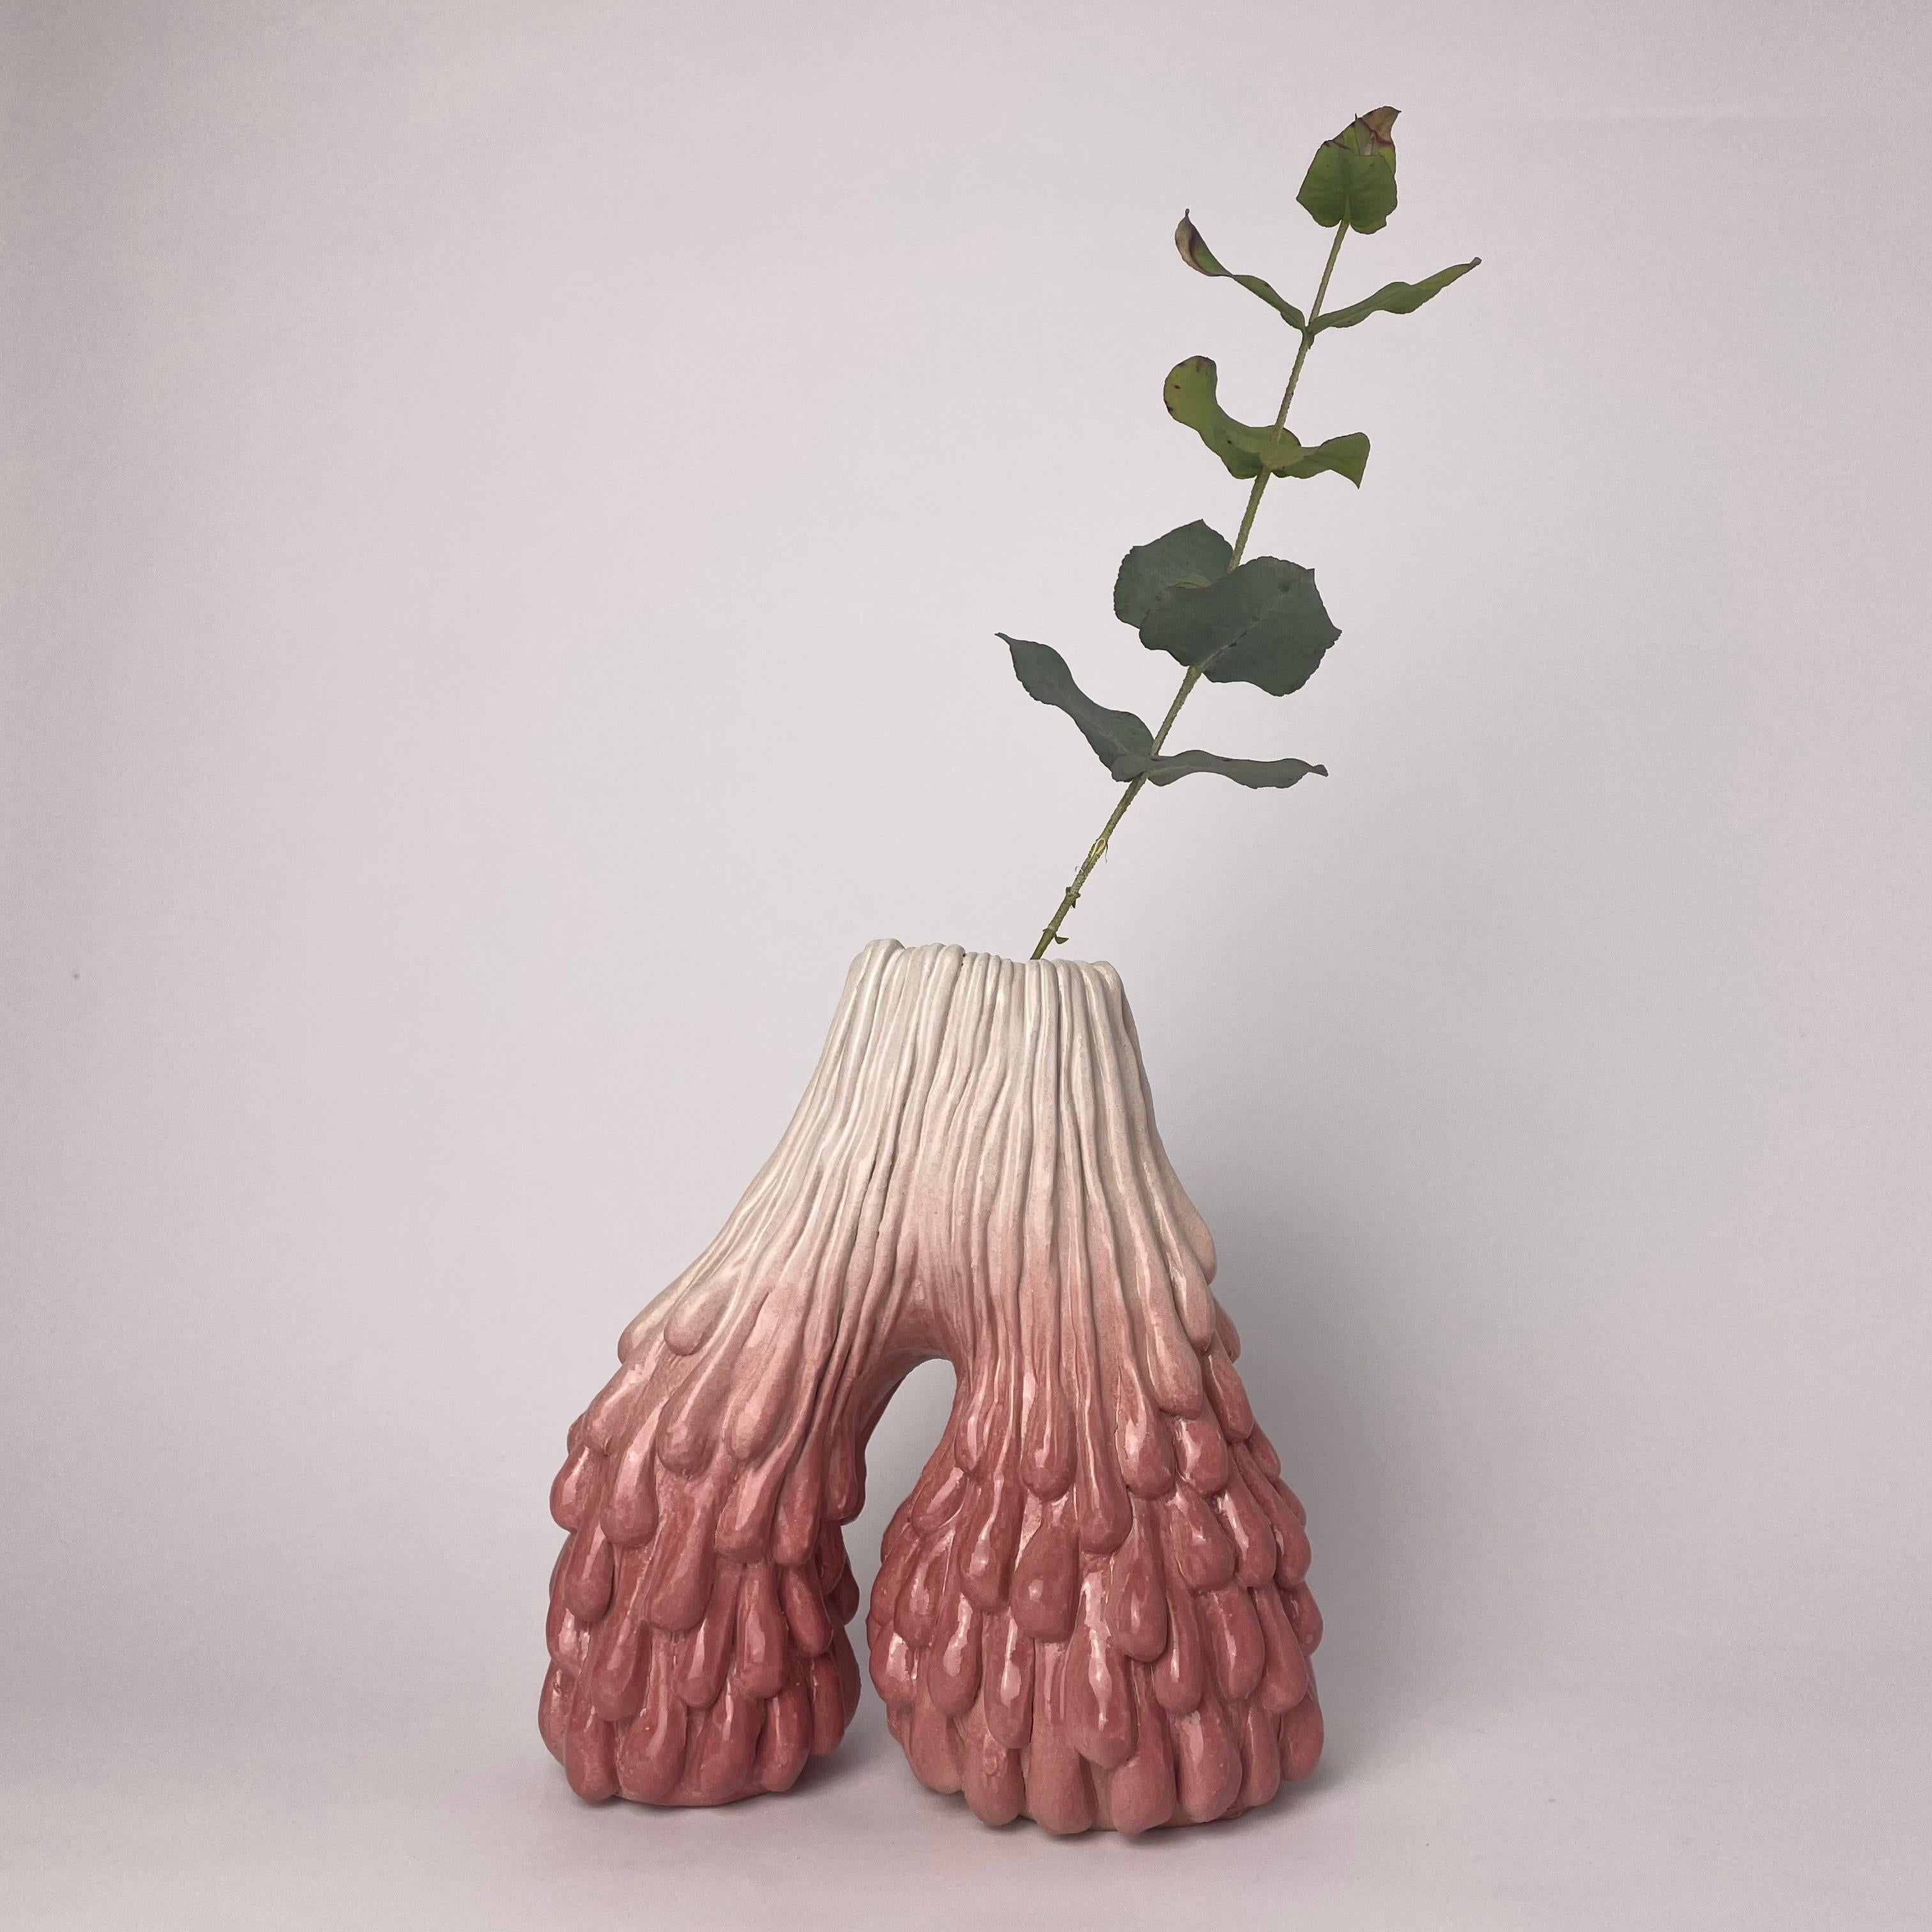 Morphic Arc vase pink by HS Studio
Morphic Collection
Dimensions: 20 x 19 x 11cm
Materials: Ceramic

Hannah Simpson is a ceramic artist, based in Kent, UK. With a passion for creating unique items, Hannah's work continues to challenge the line